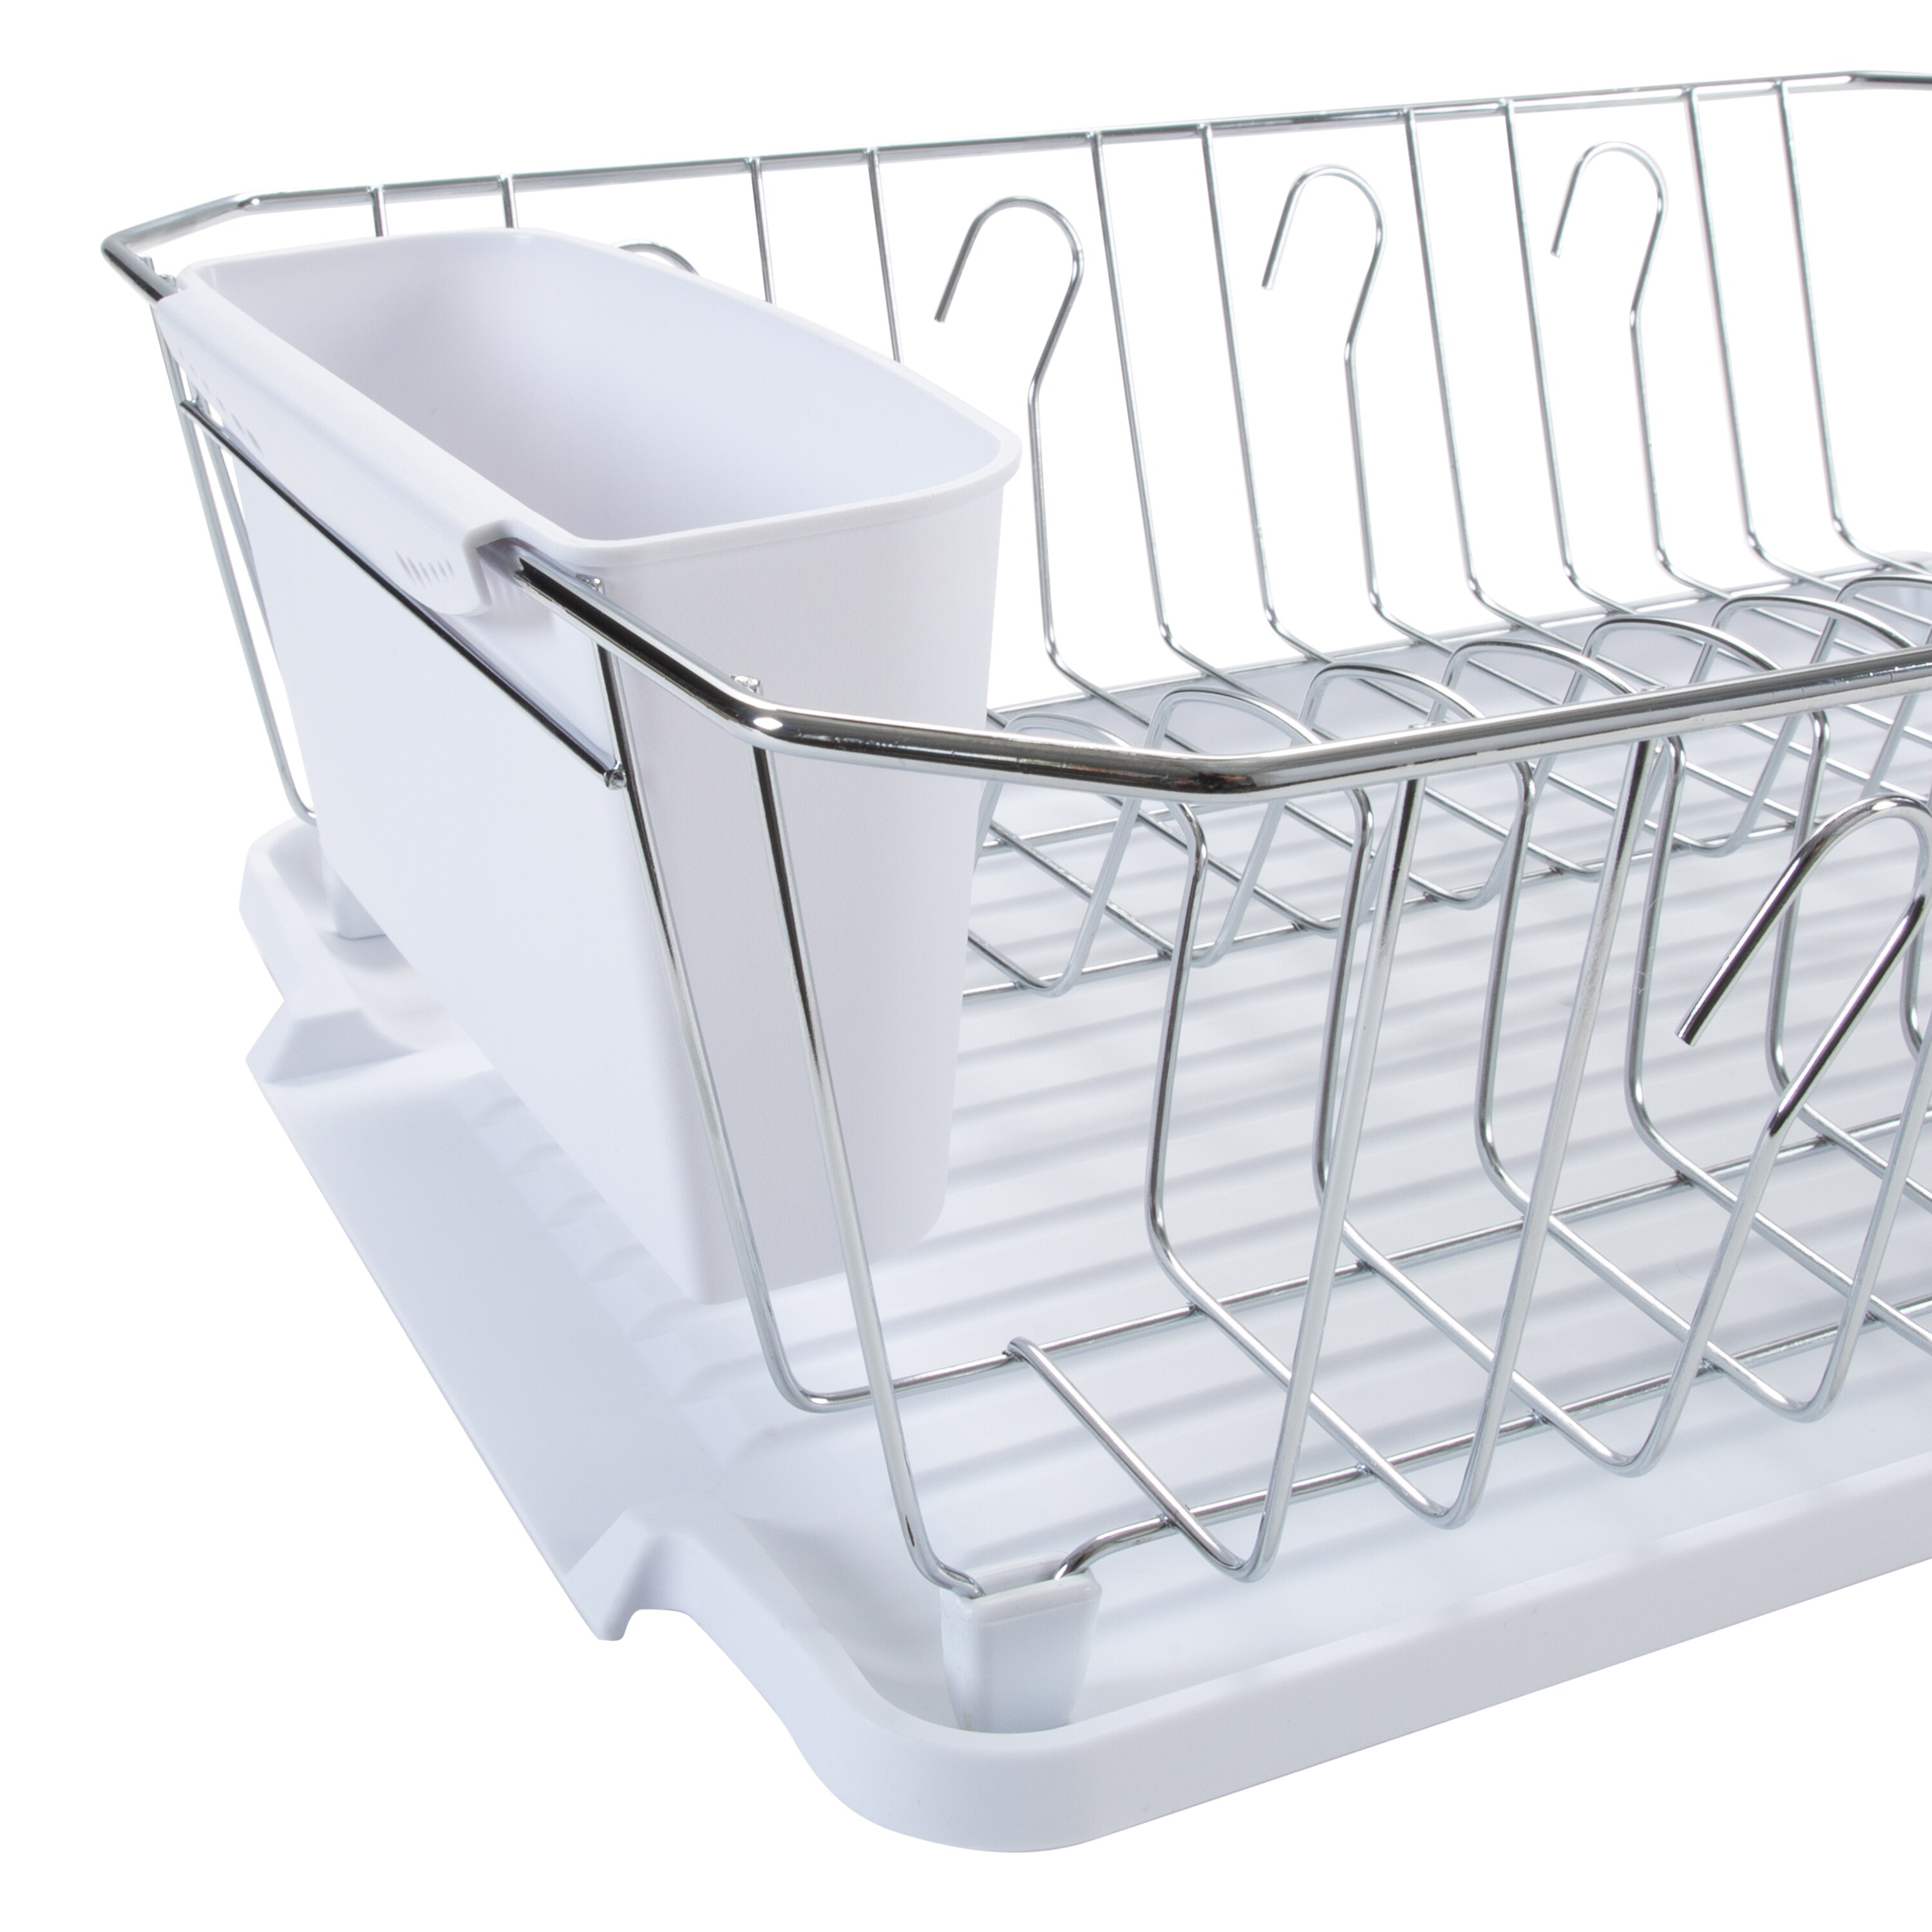 1pc Stainless Steel Kitchen Basket & Dish Rack With Drainage